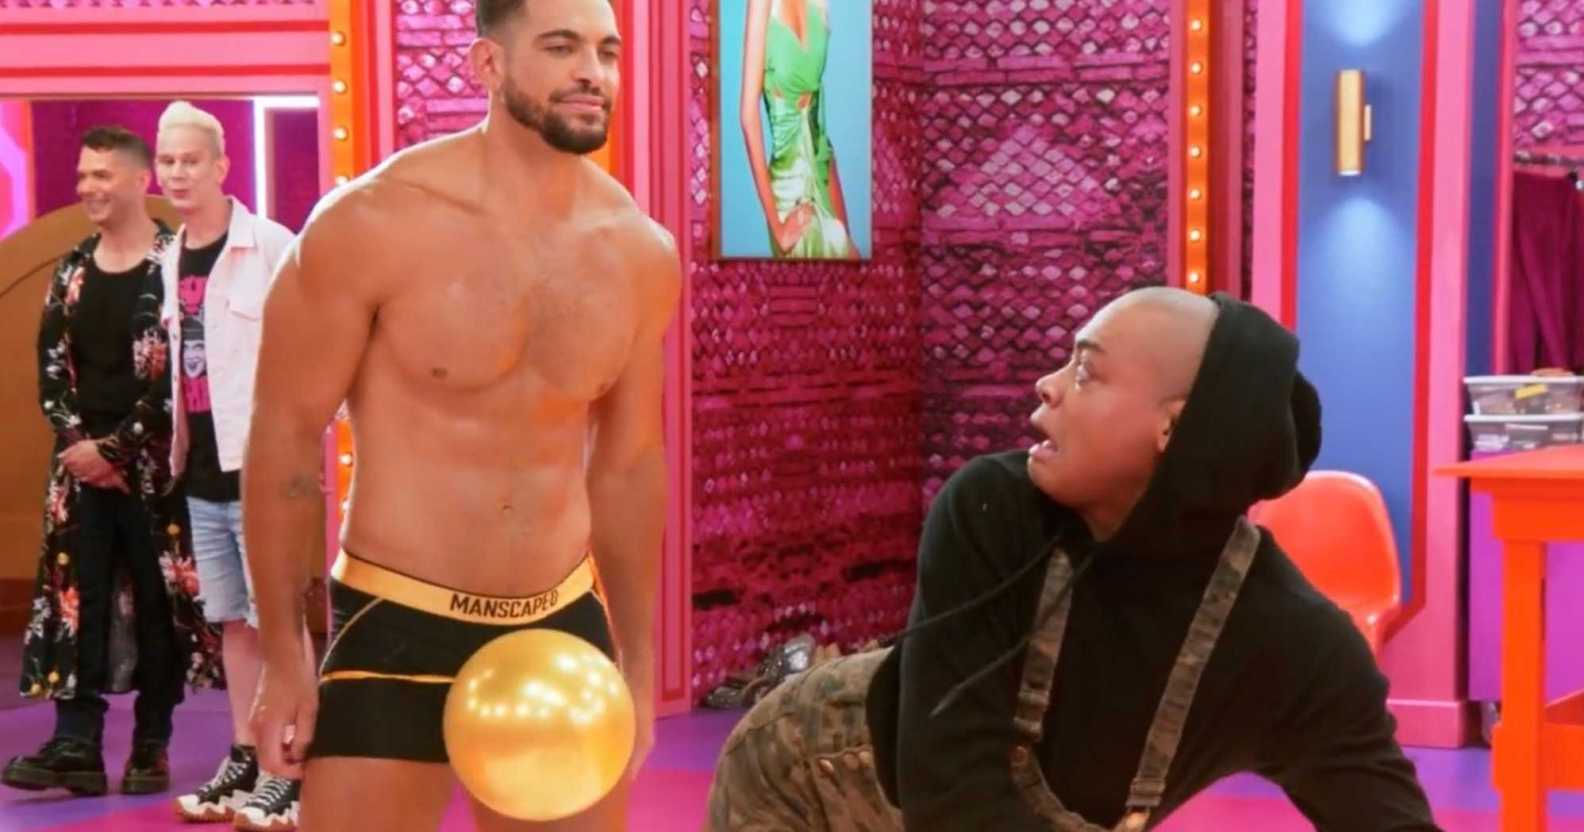 All Stars 8 episode four screengrab